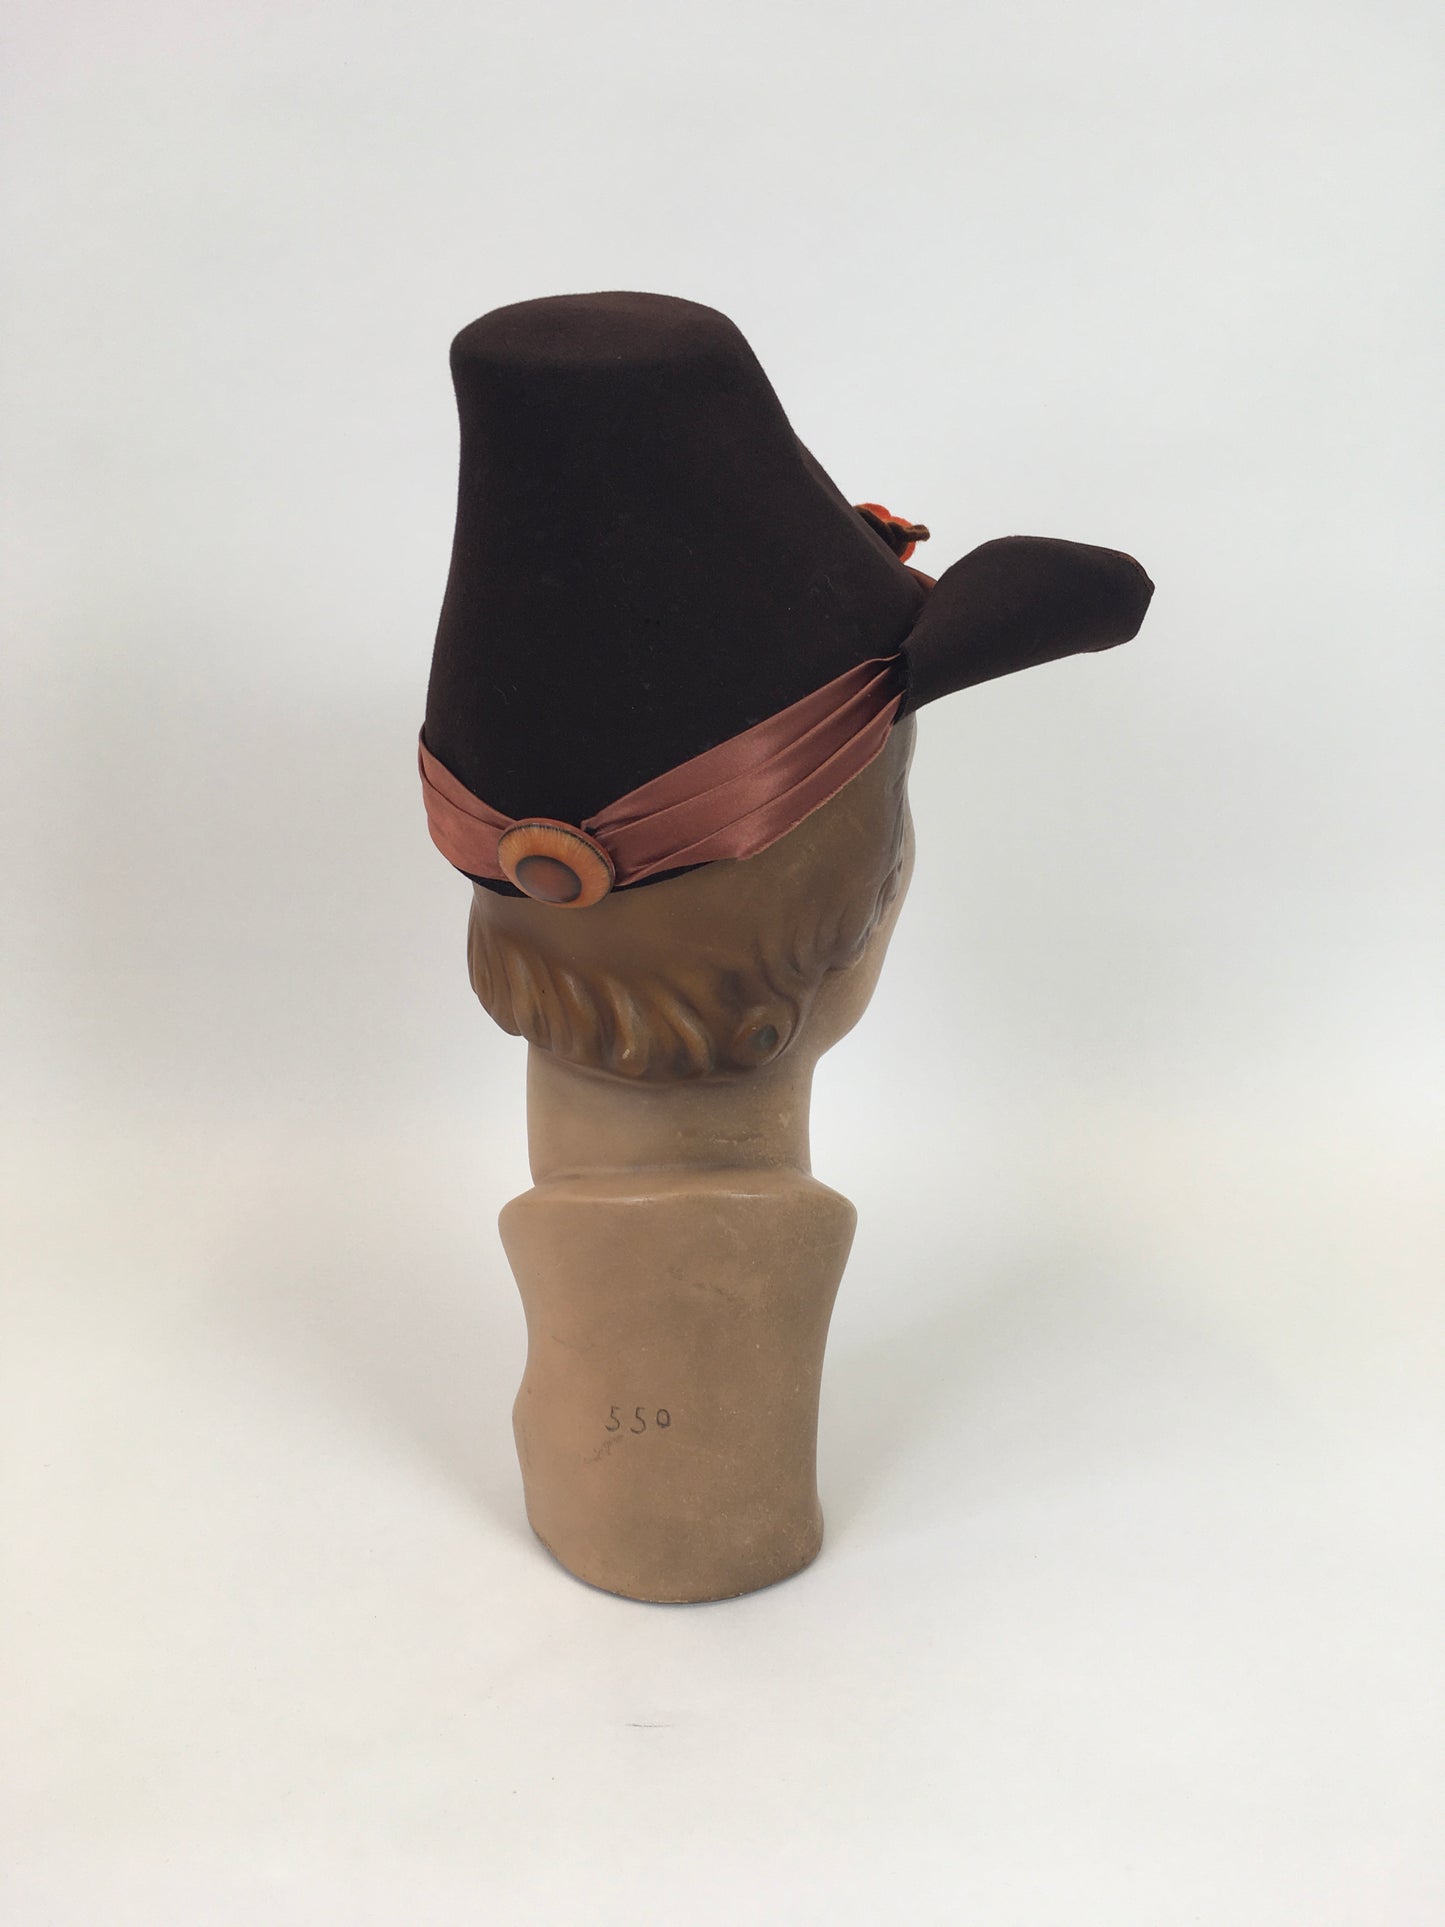 Original 1940's Sensational Fedora Hat With Funnel Top - In Warming Brown With Make Do And Mend Floral